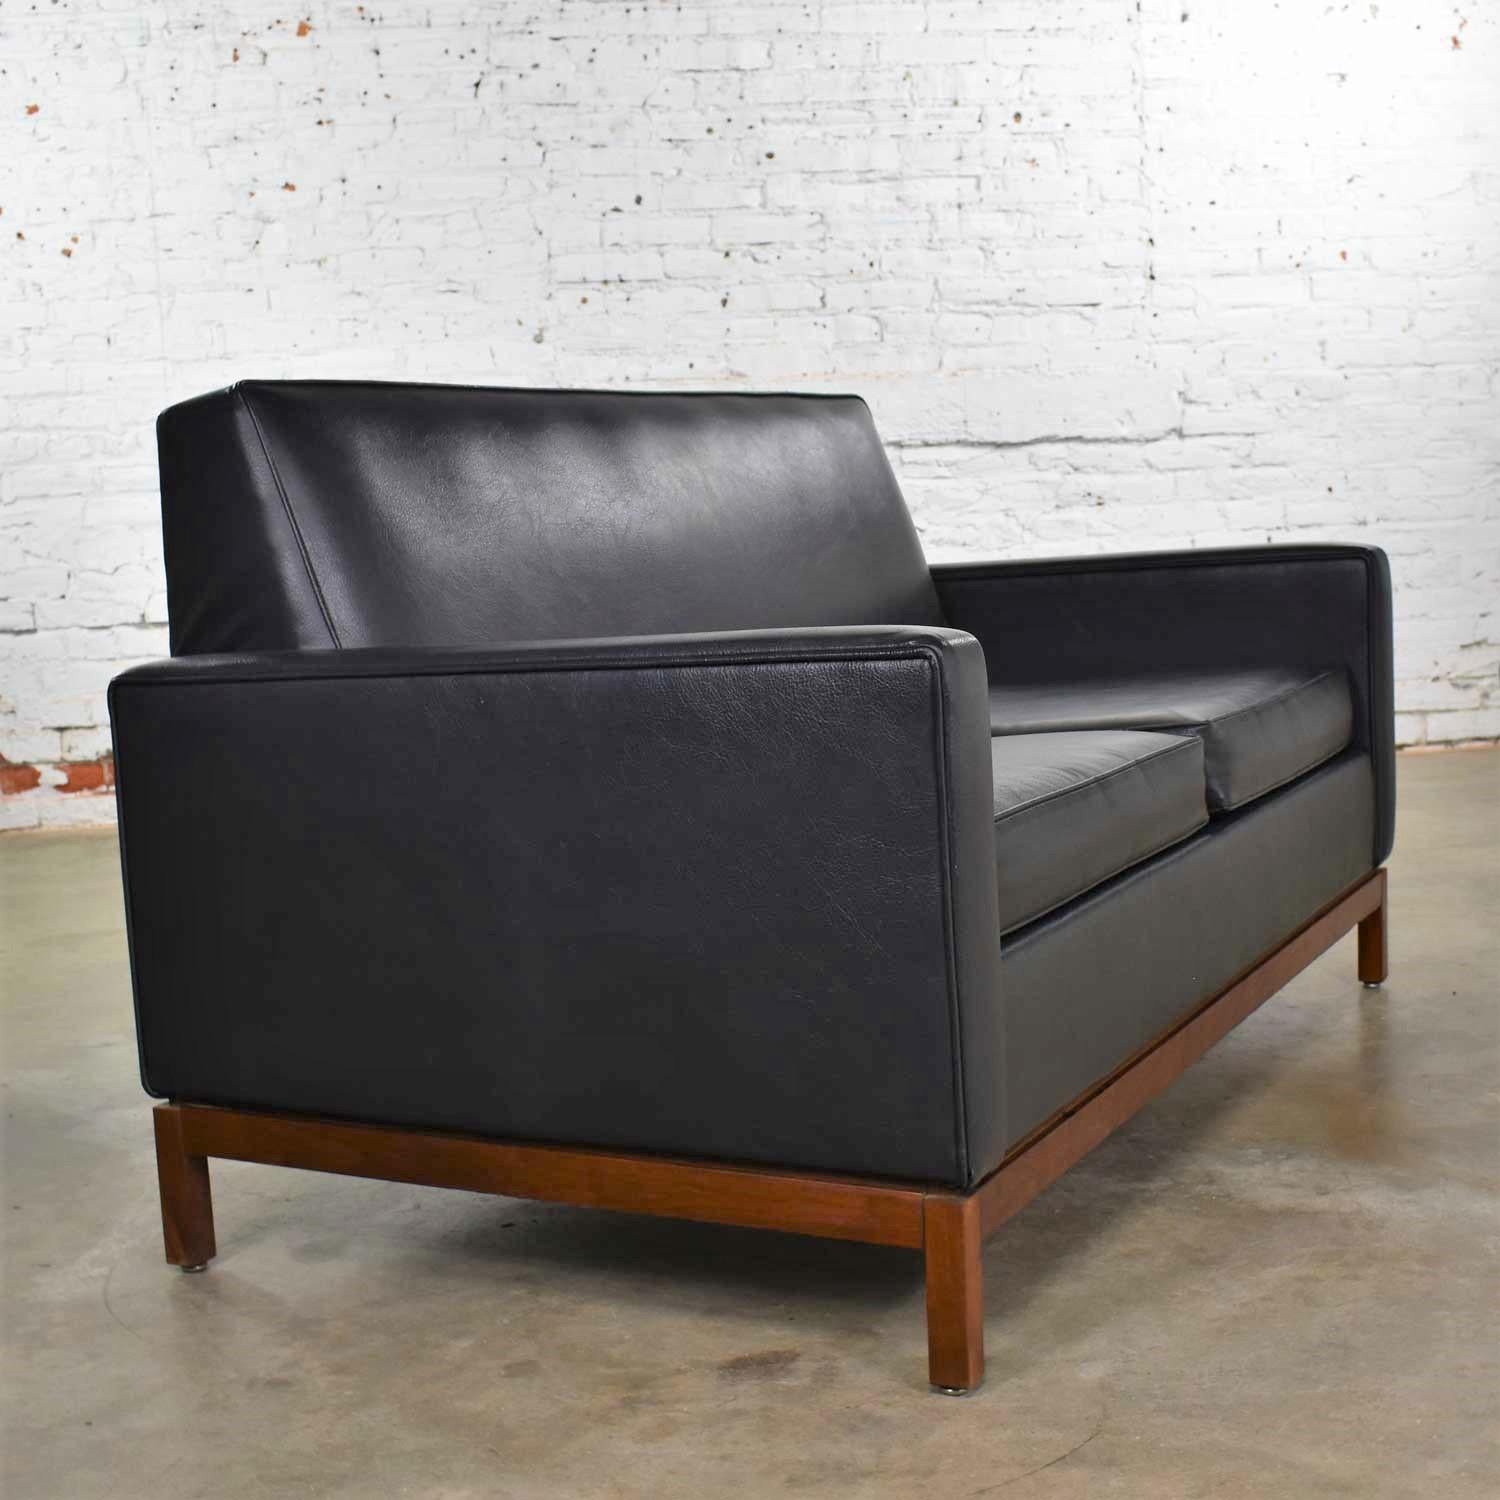 Mid-Century Modern Black Faux Leather Love Seat Sofa by Taylor Chair Co. Style D In Good Condition For Sale In Topeka, KS